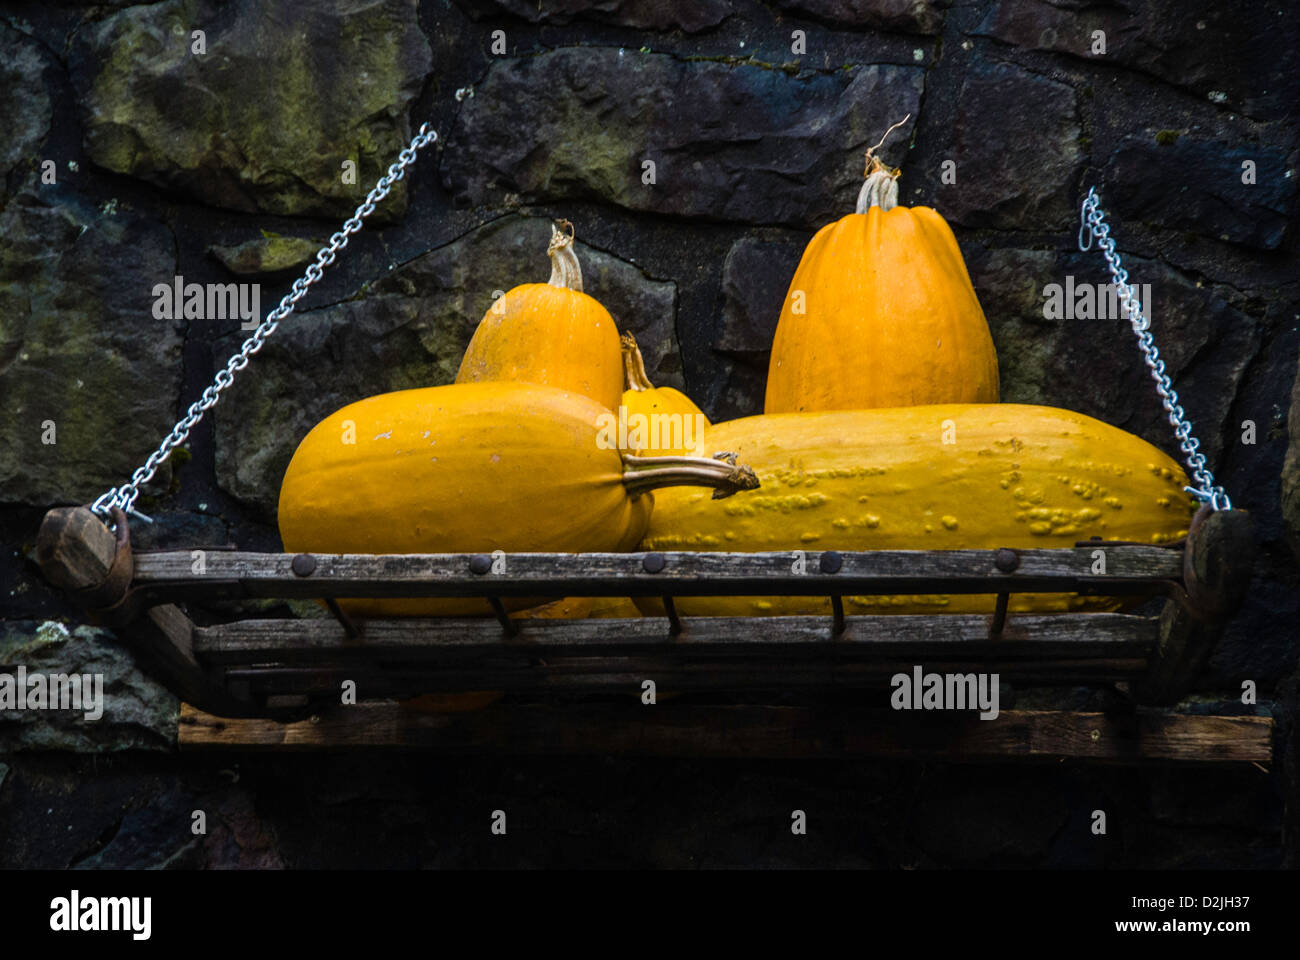 Squash On Wooden Plank - Pumpkins on a wooden holder Stock Photo